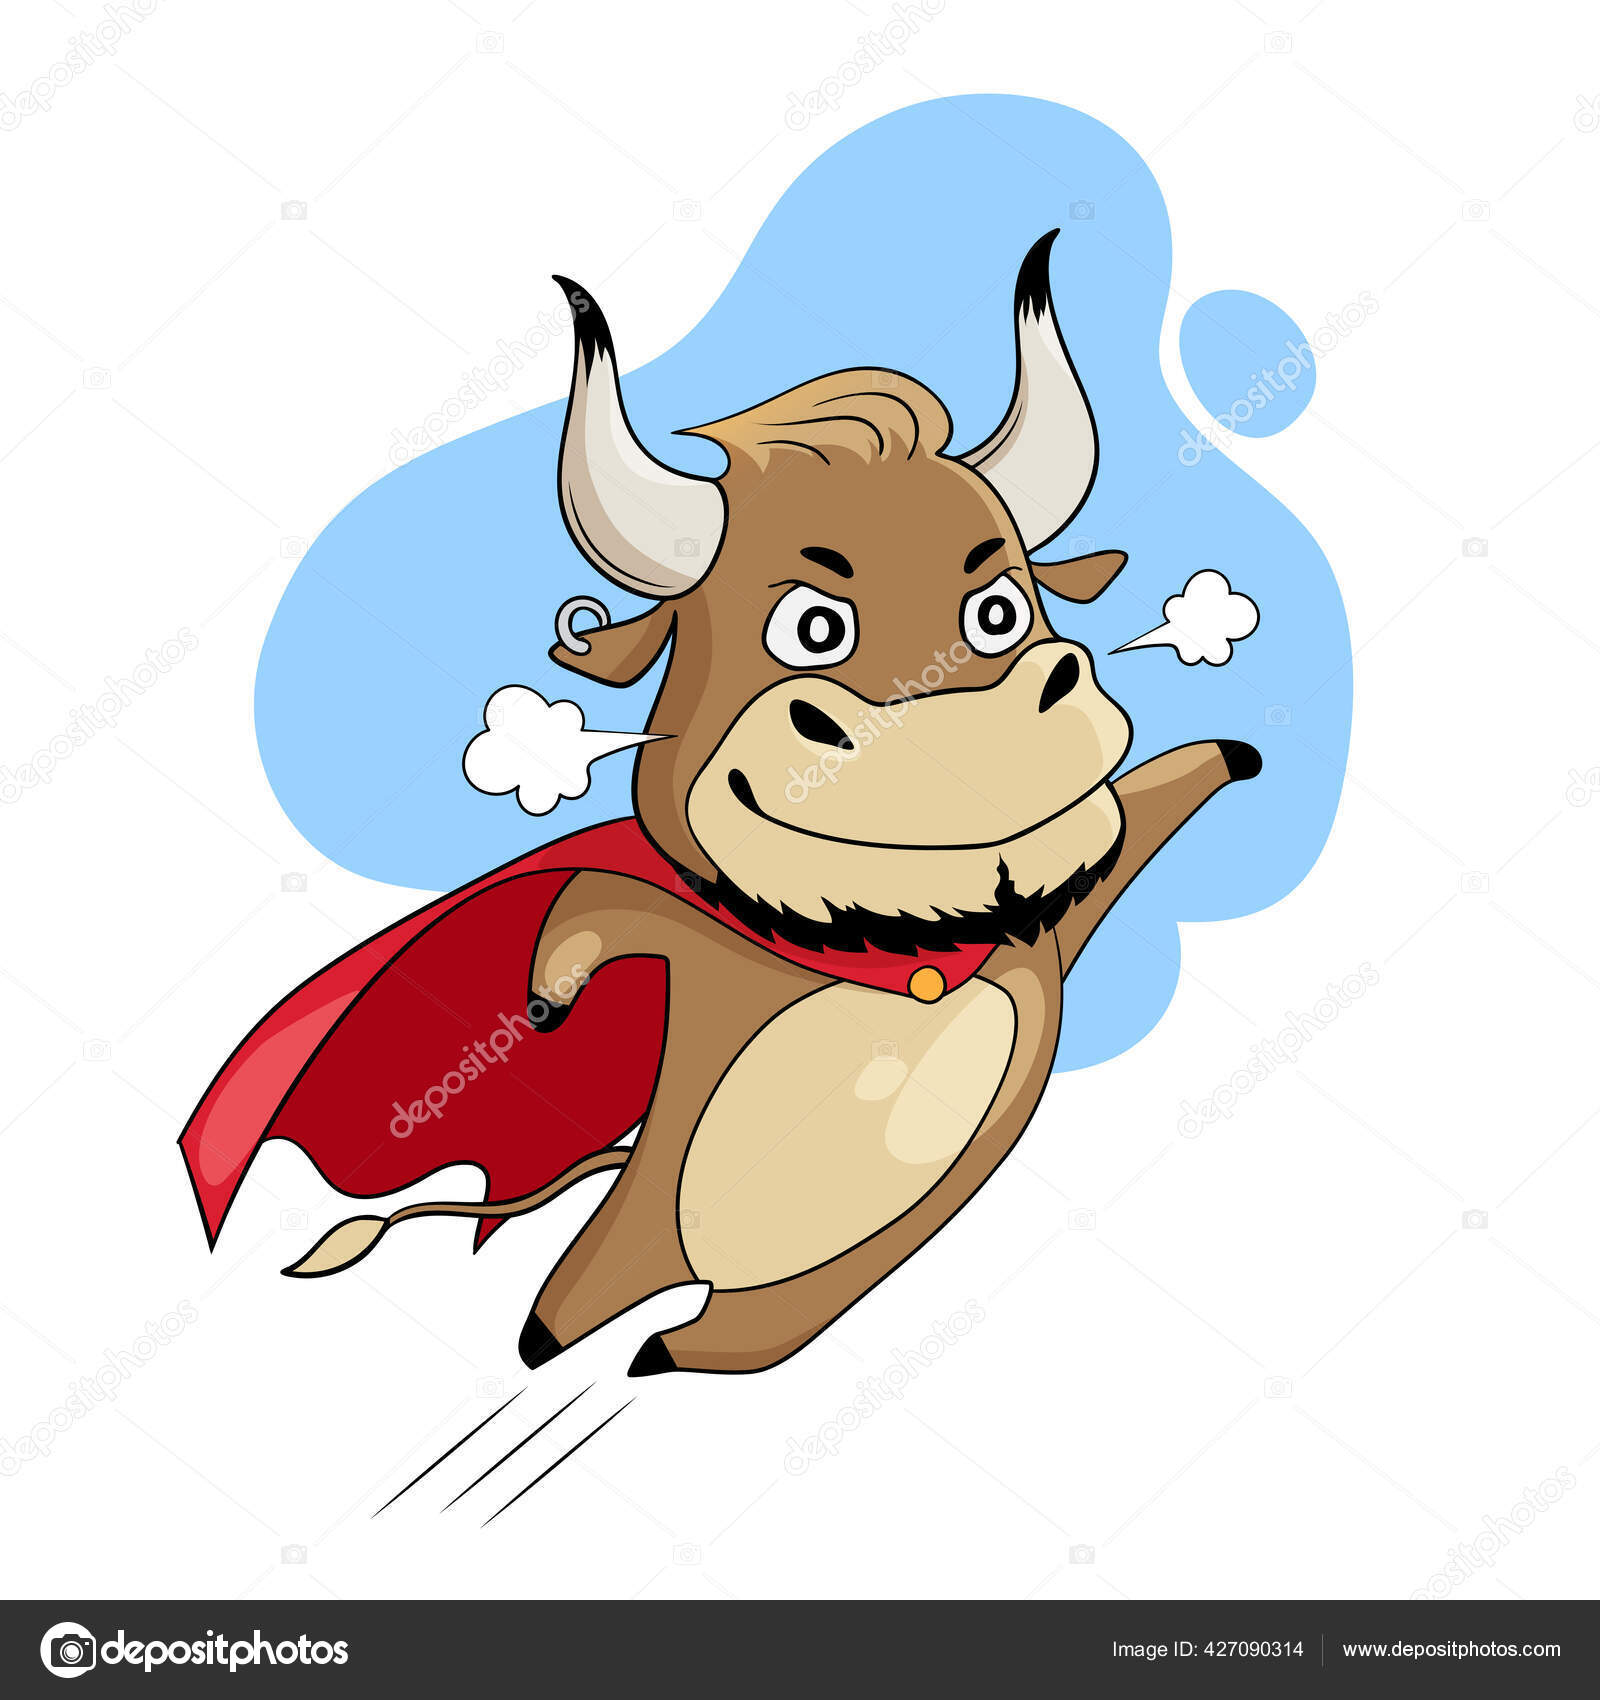 Cool Bull Flying In A Red Superhero Cape Symbol Of 21 Year Of The Ox Cartoon Vector Illustration Stock Vector Image By C Vera Orlova